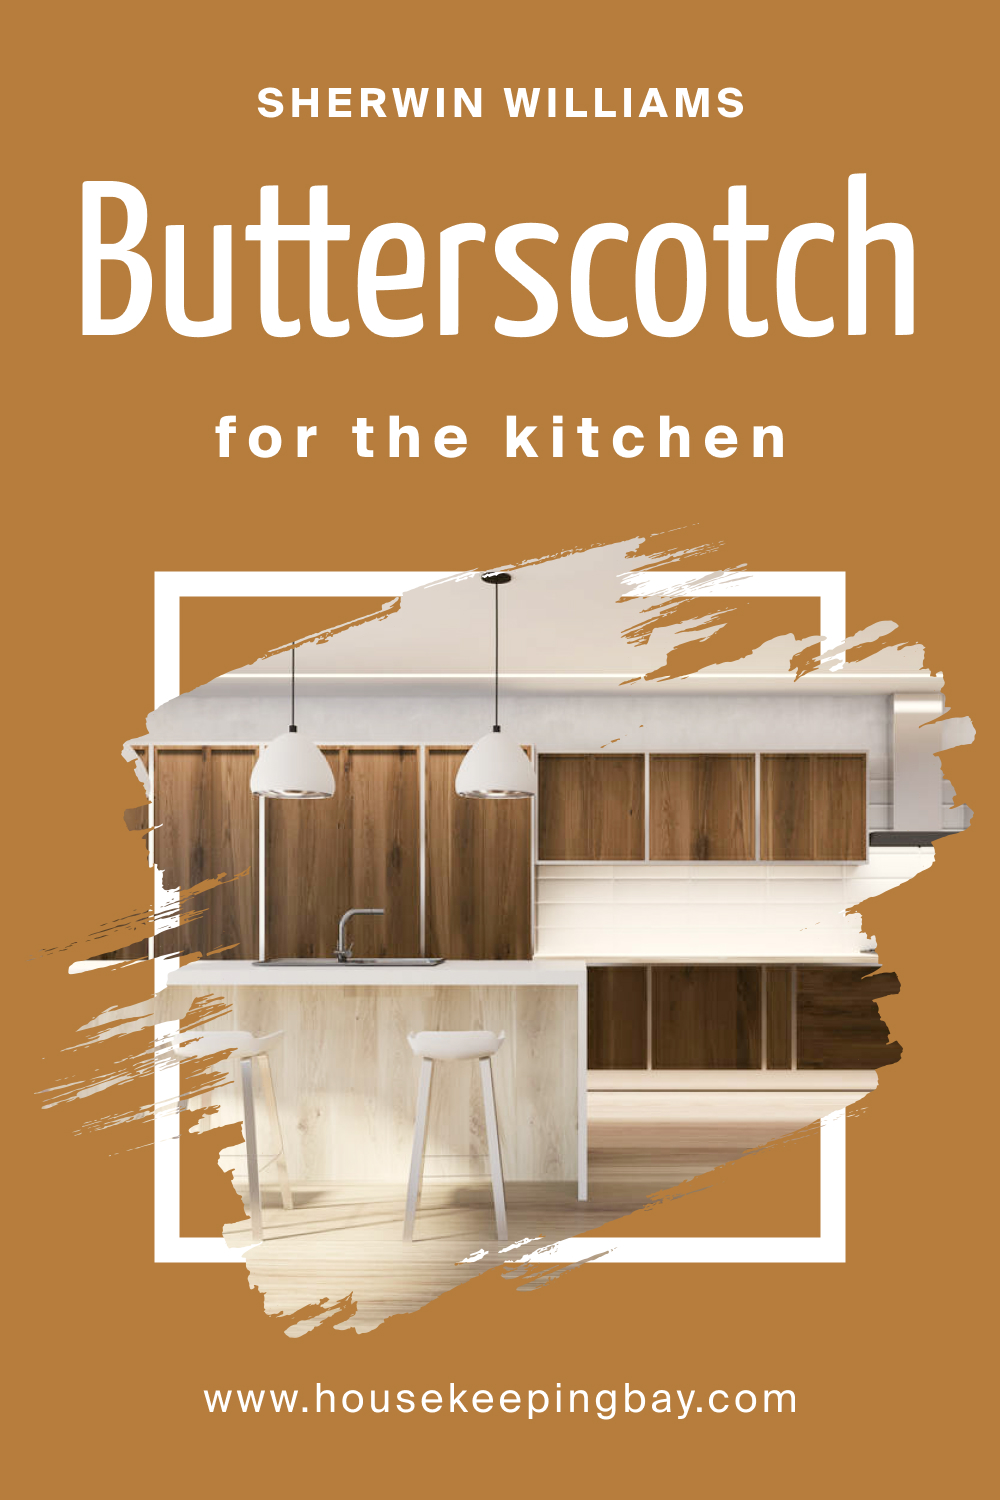 Sherwin Williams. SW 6377 Butterscotch For the Kitchens